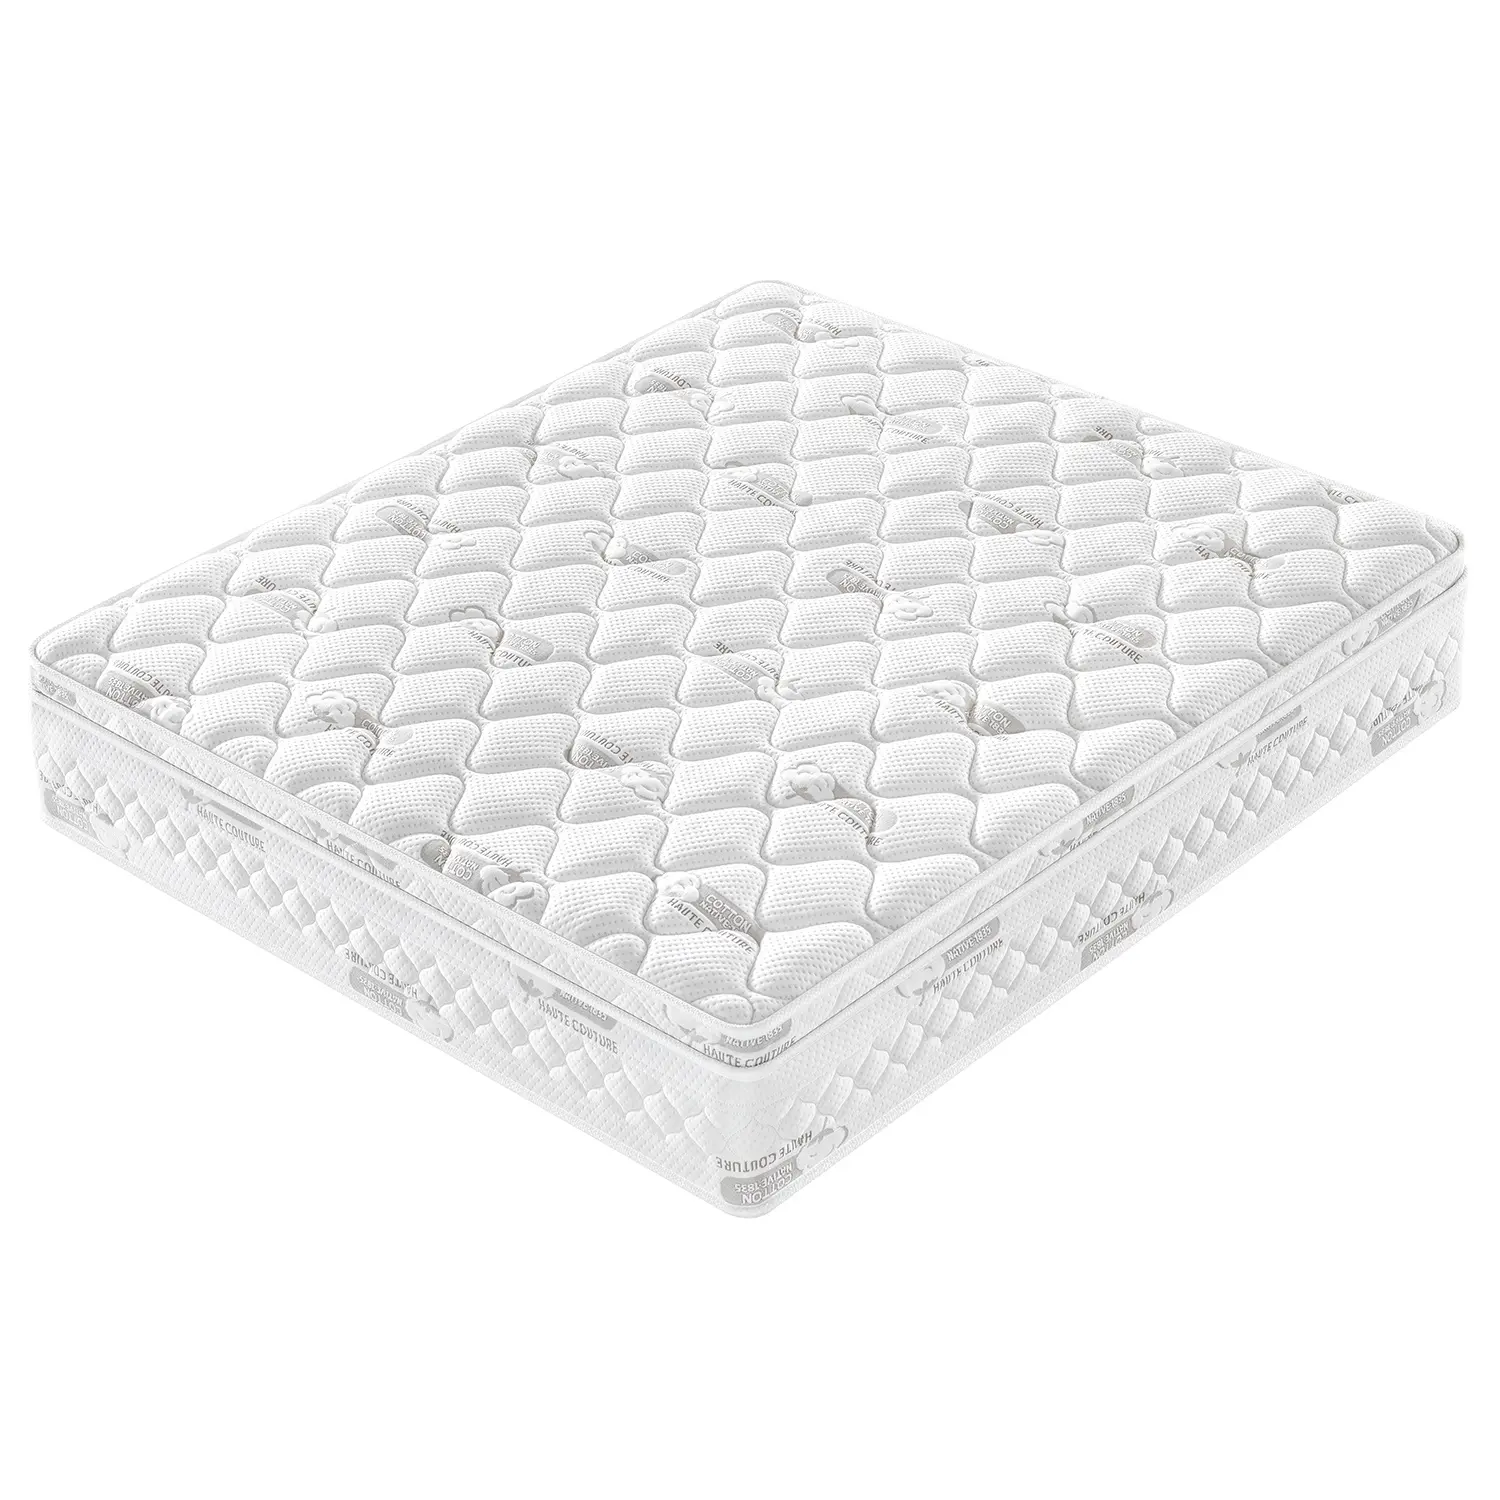 200*180*25cm 12 Inch Tight Top Rolling Inner Spring Matress With Natural Latex Certified High Density Foam Mattress